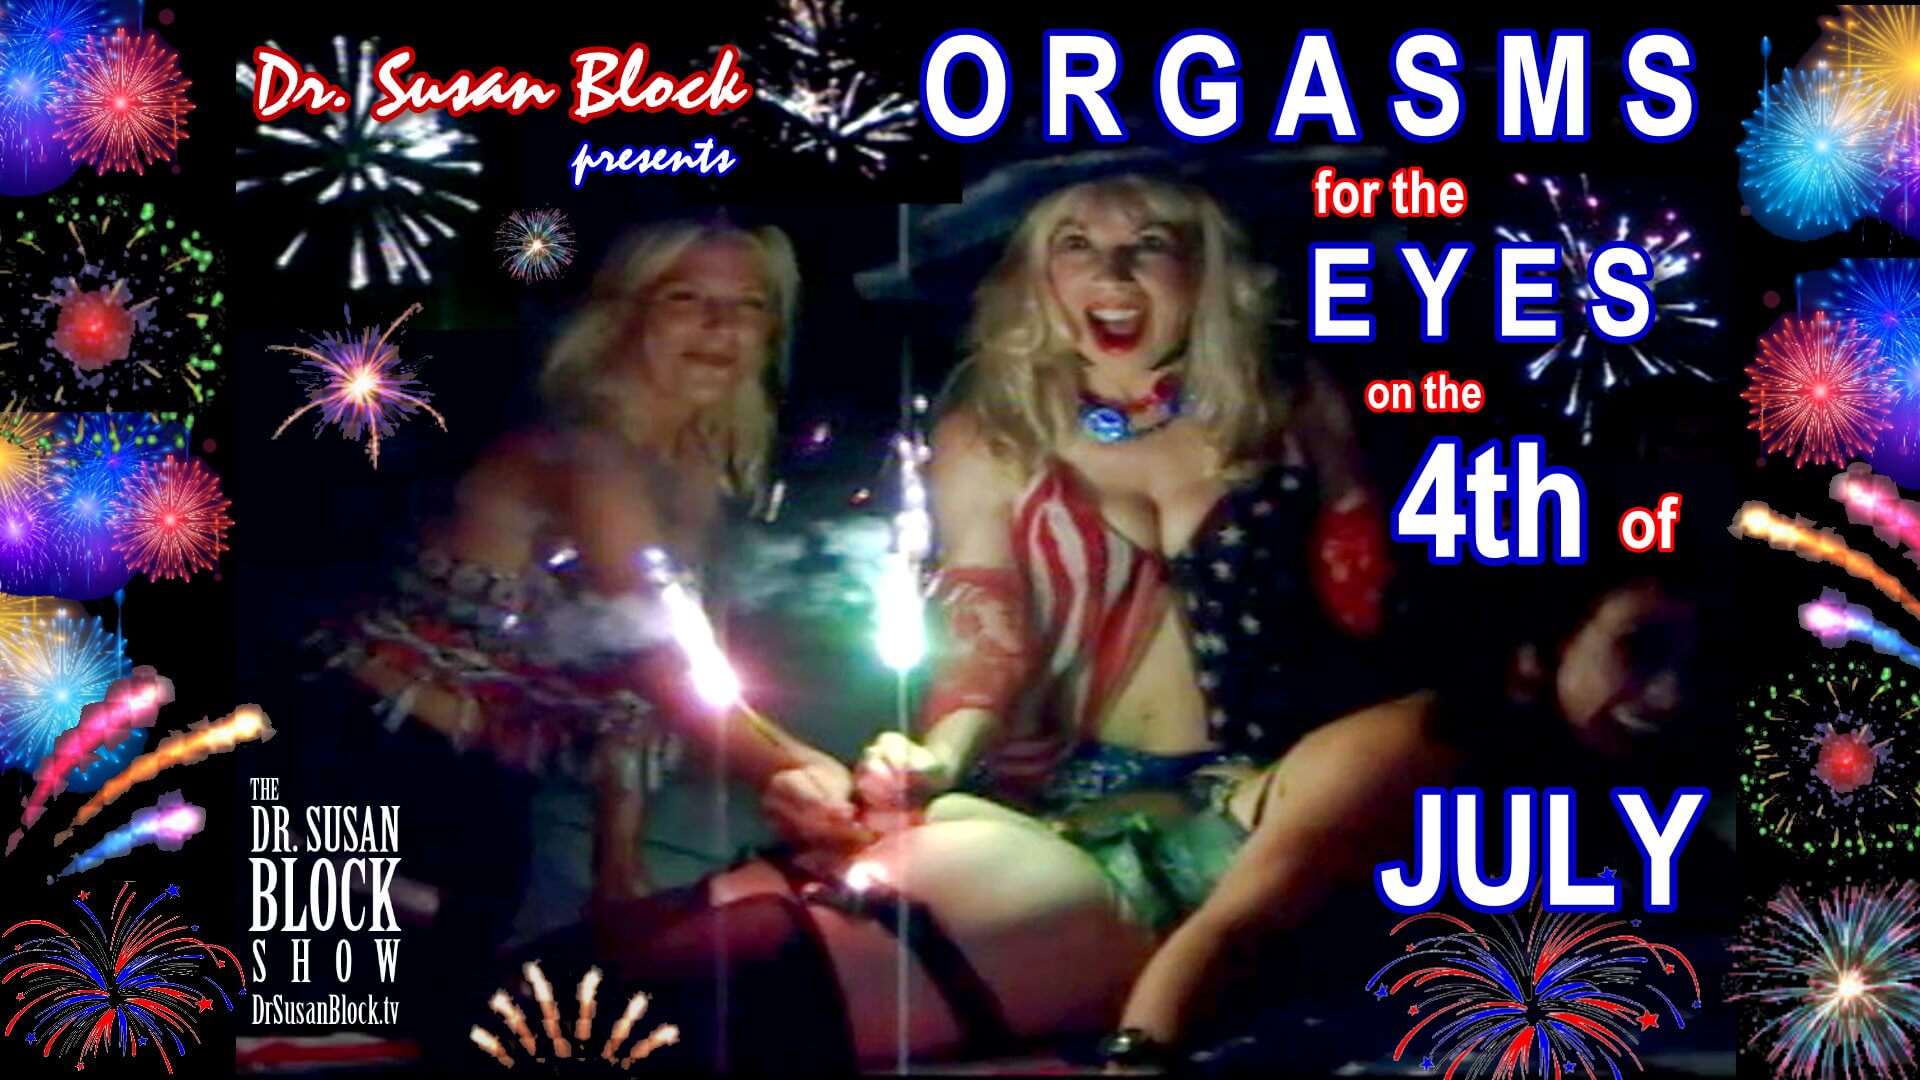 ORGASMS for the EYE on The 4th of JULY! photo pic